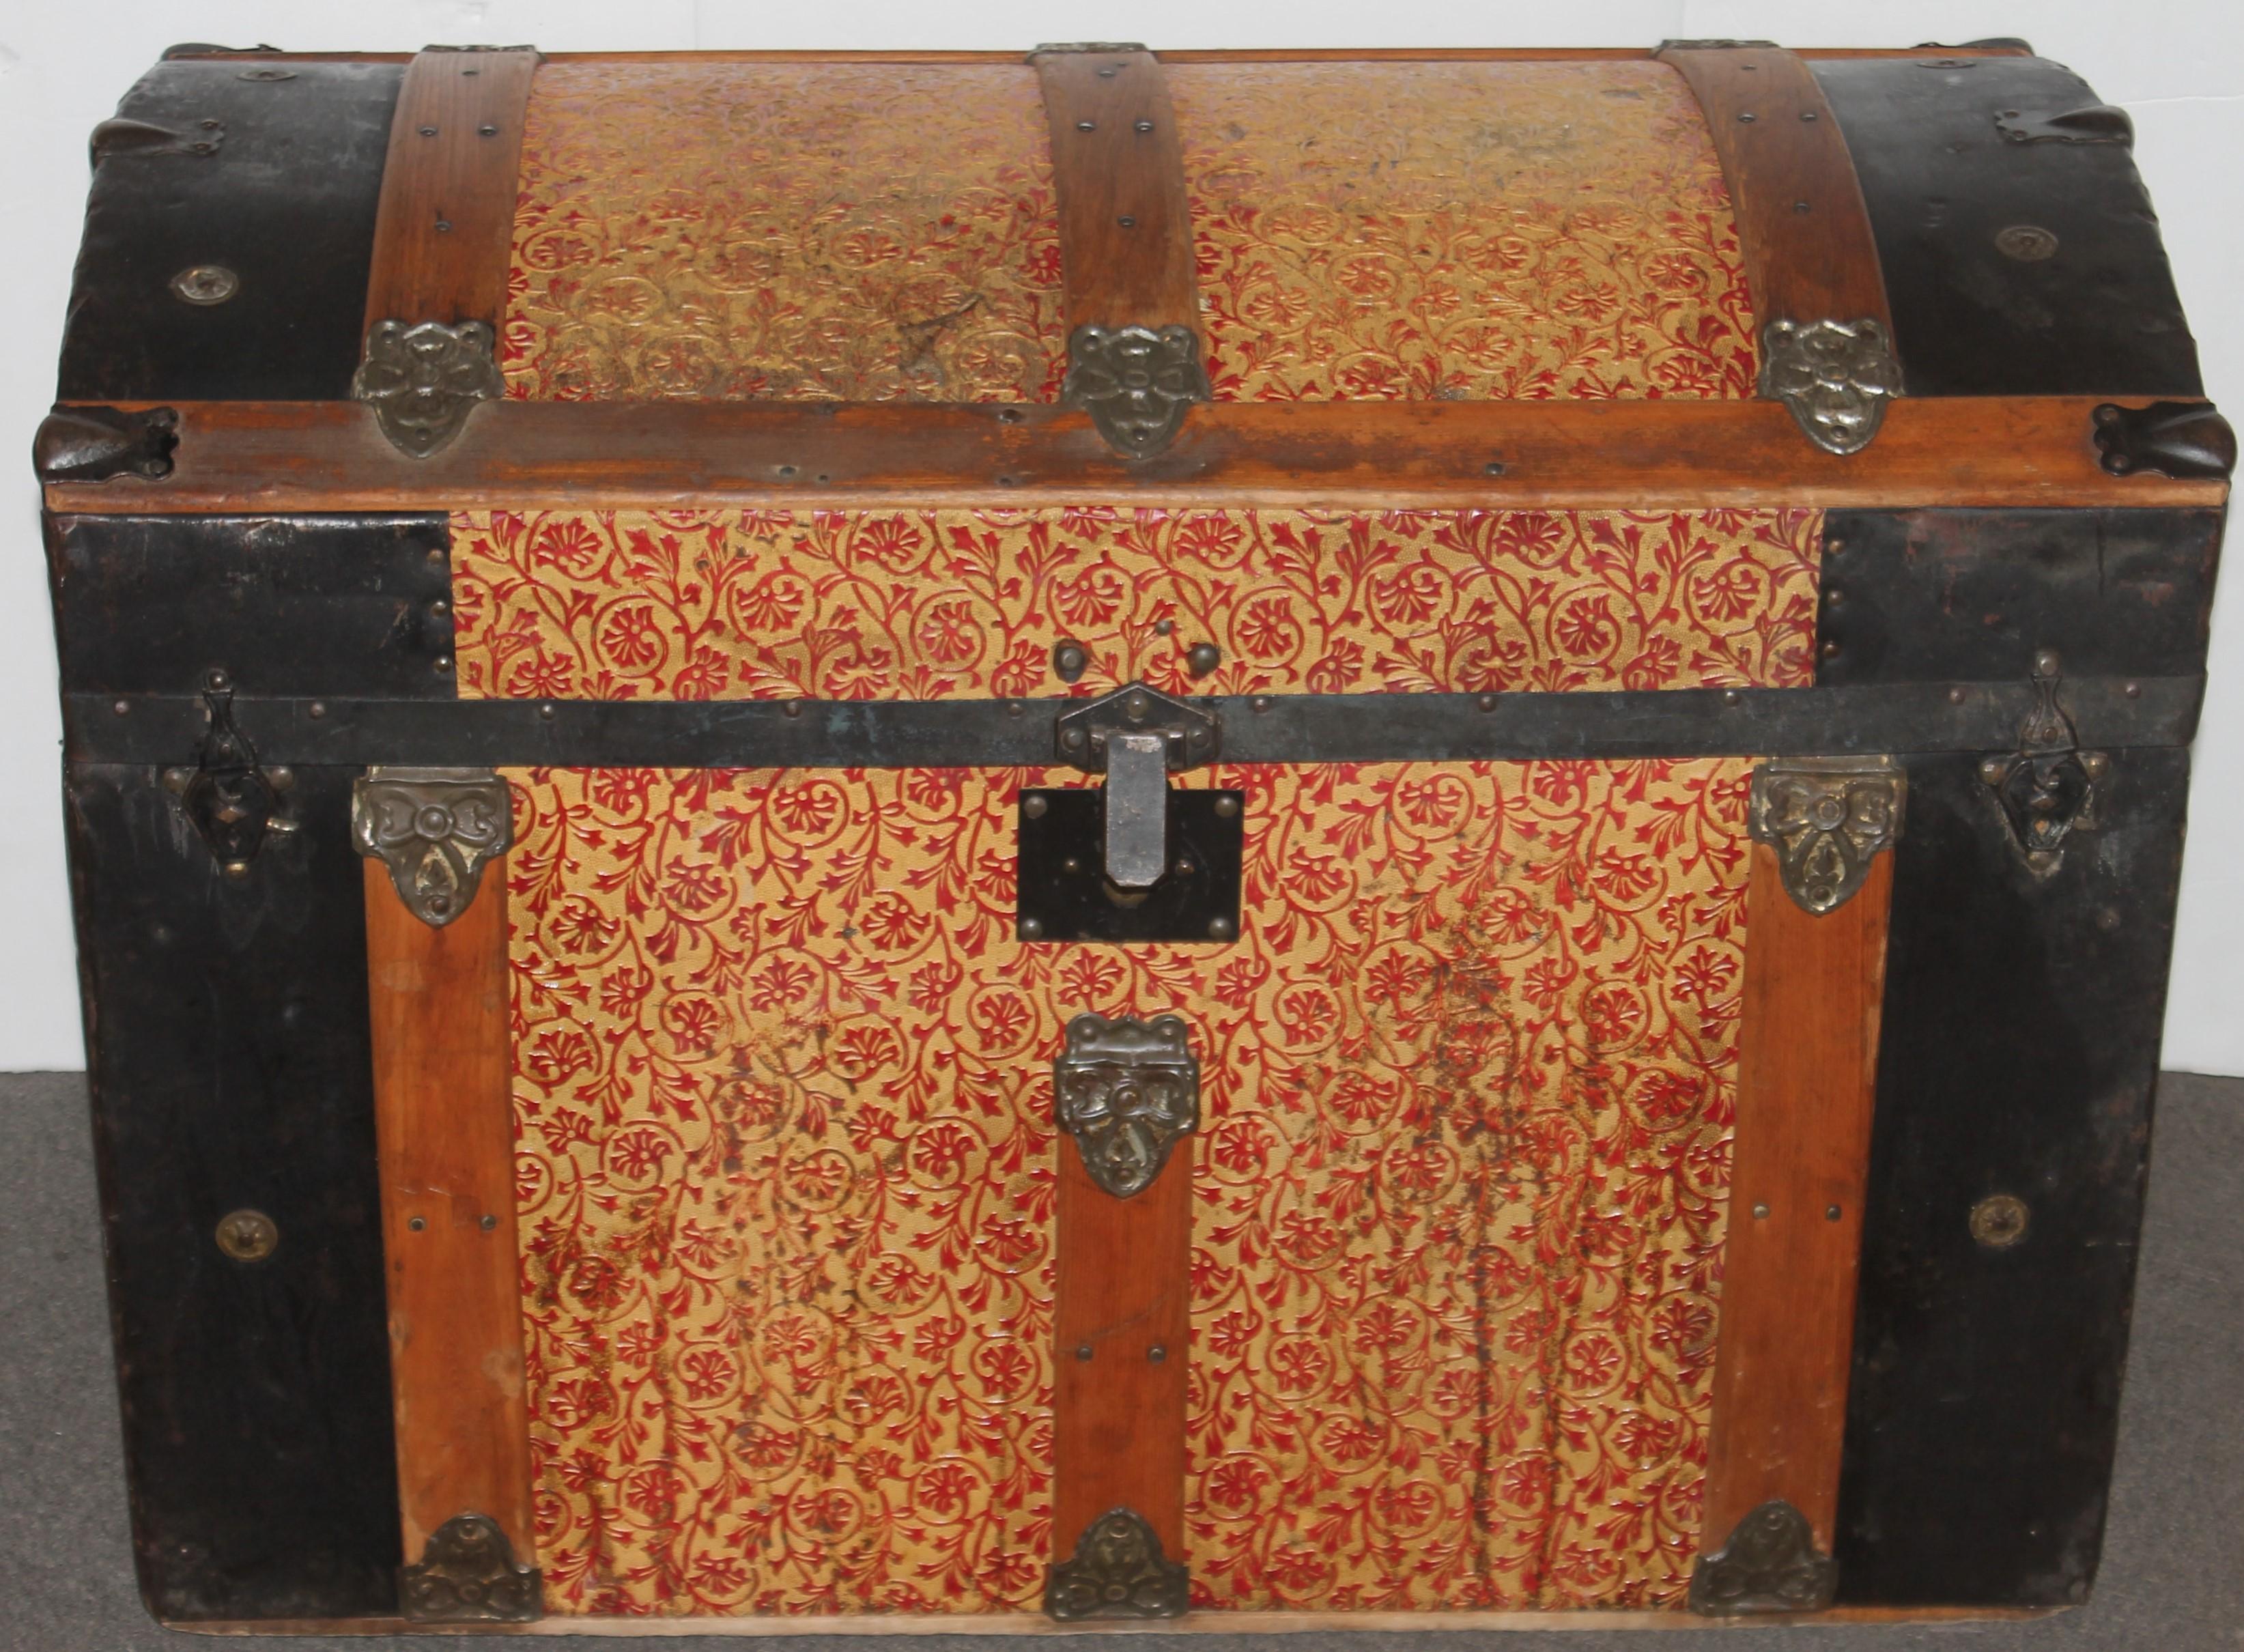 Fantastic original painted 19thc dome top trunk or steamer trunk in fantastic condition. It has a wonderful worn and aged patina. The condition is very good with exception to missing leather side handles? These handles are easy to replace with a old